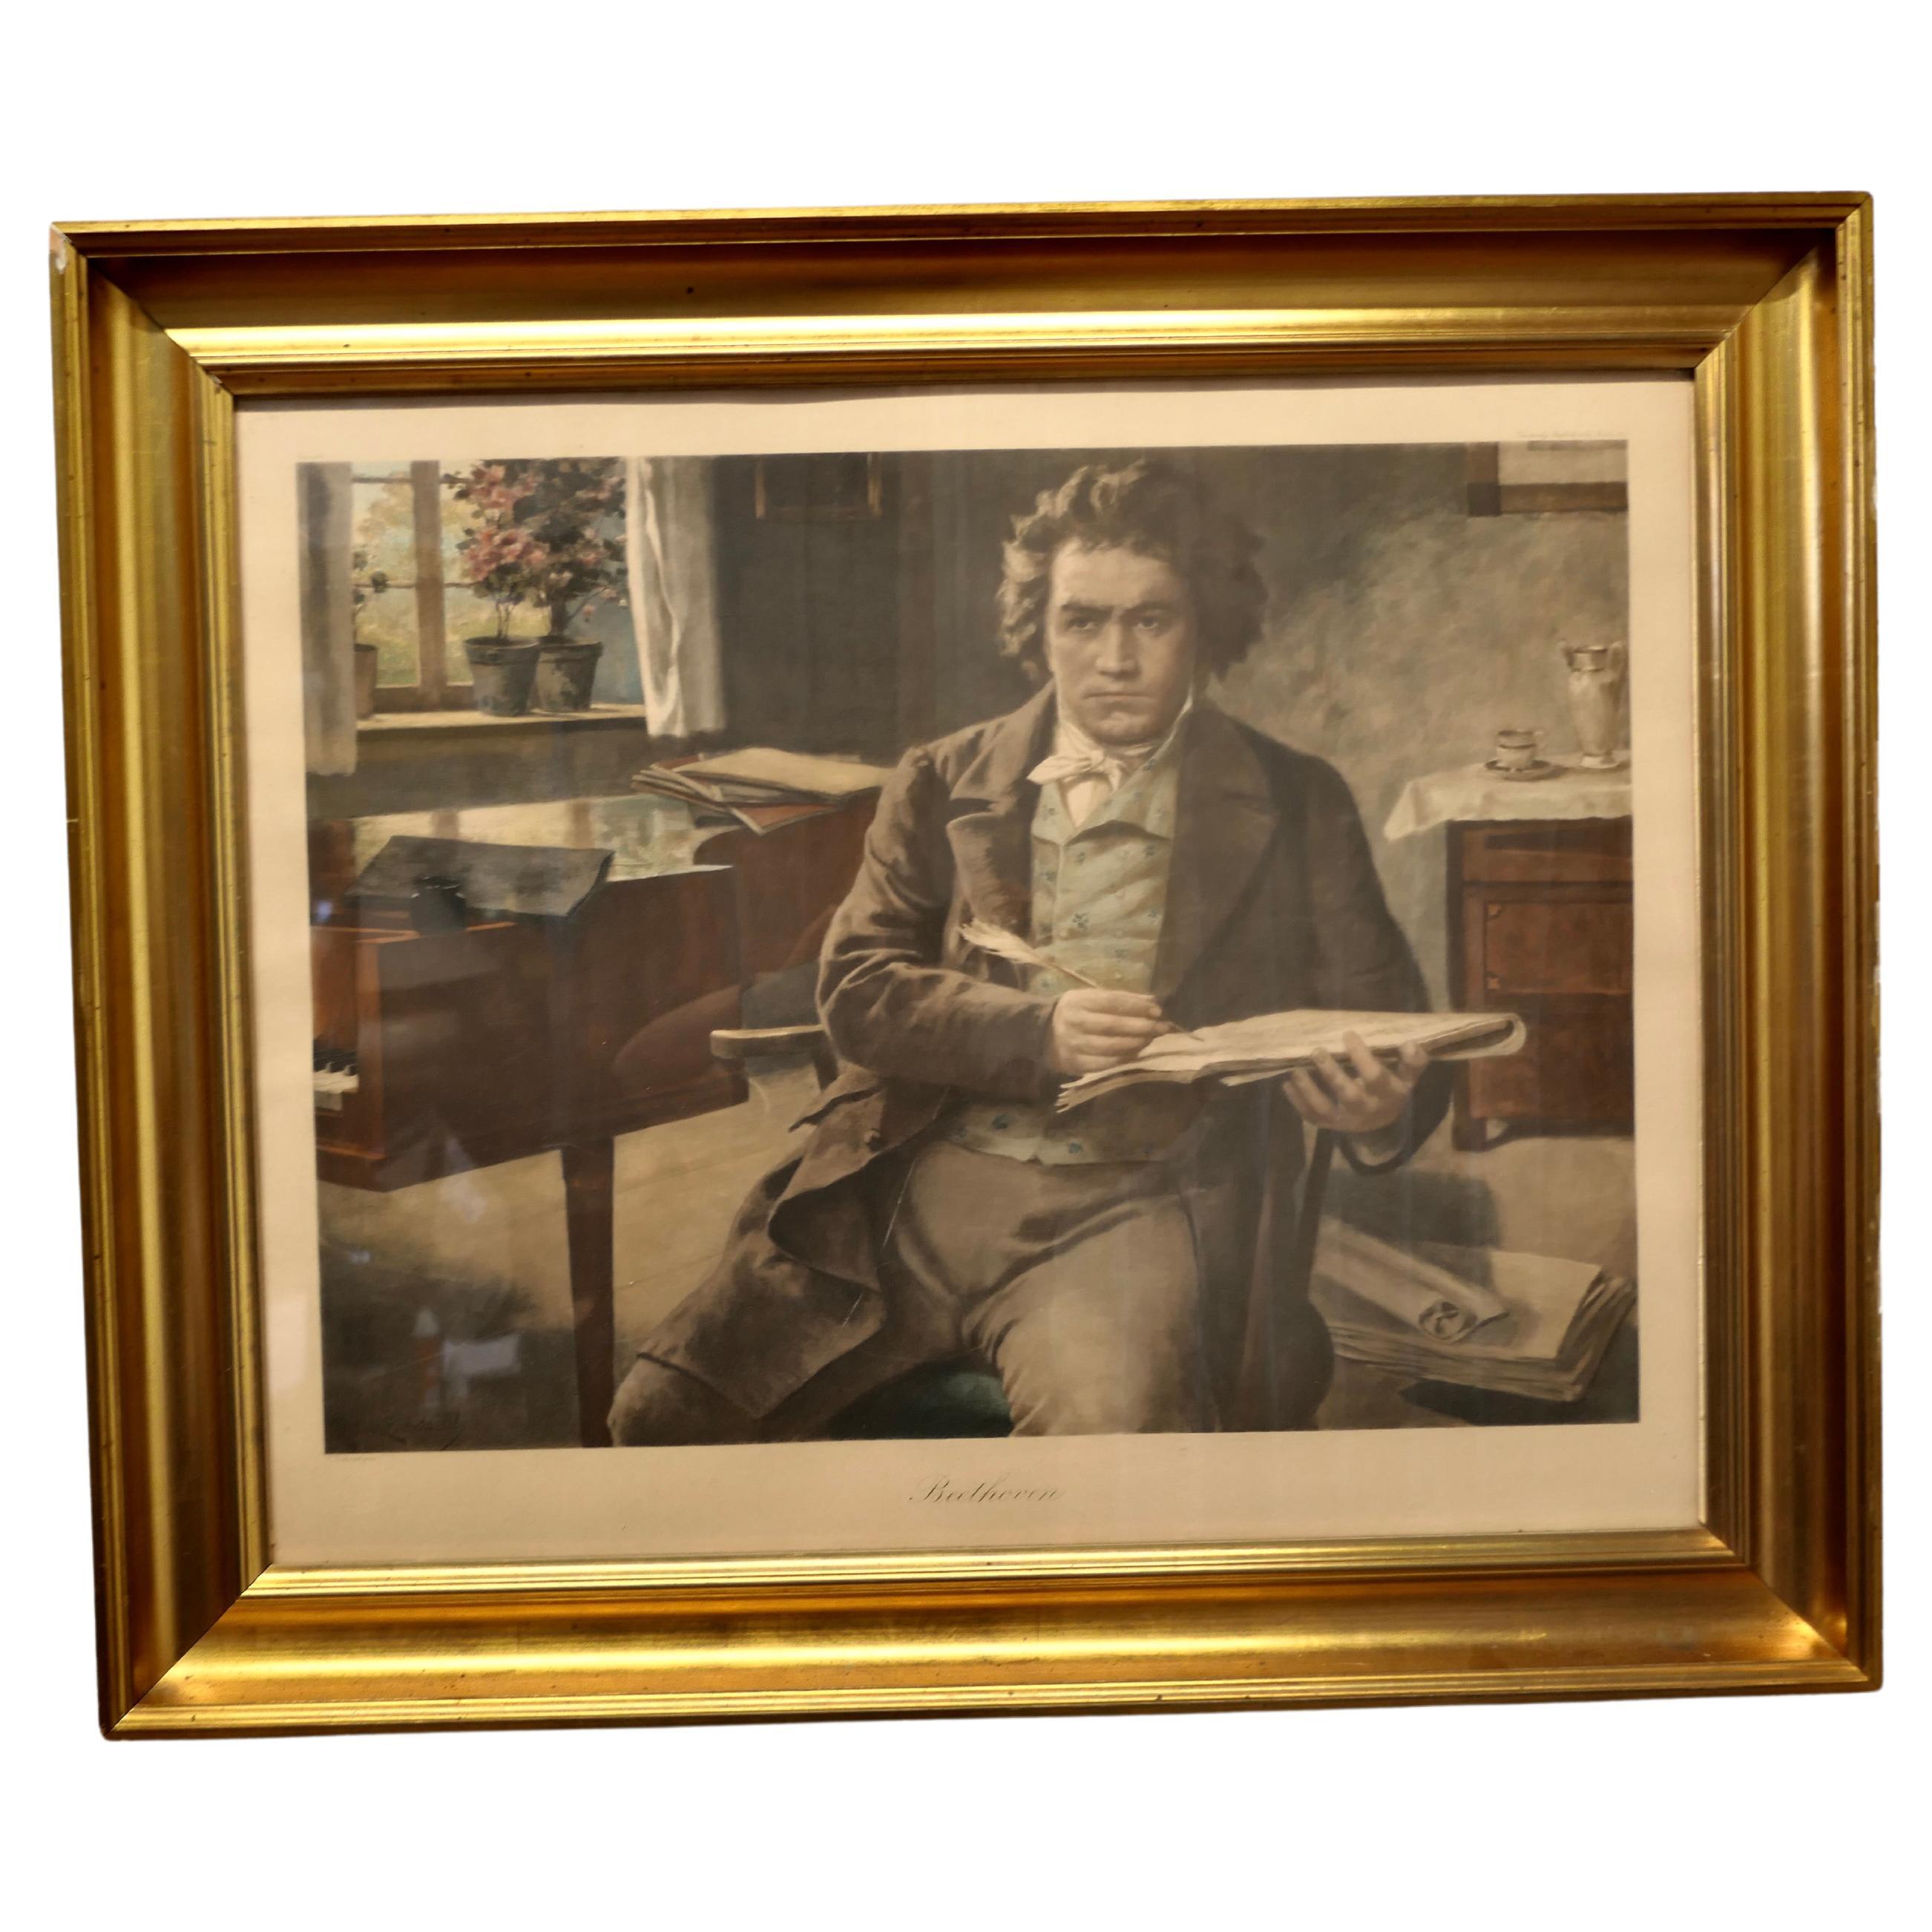  19th Century Framed Print of Beethoven   A portrait of Beethoven   For Sale